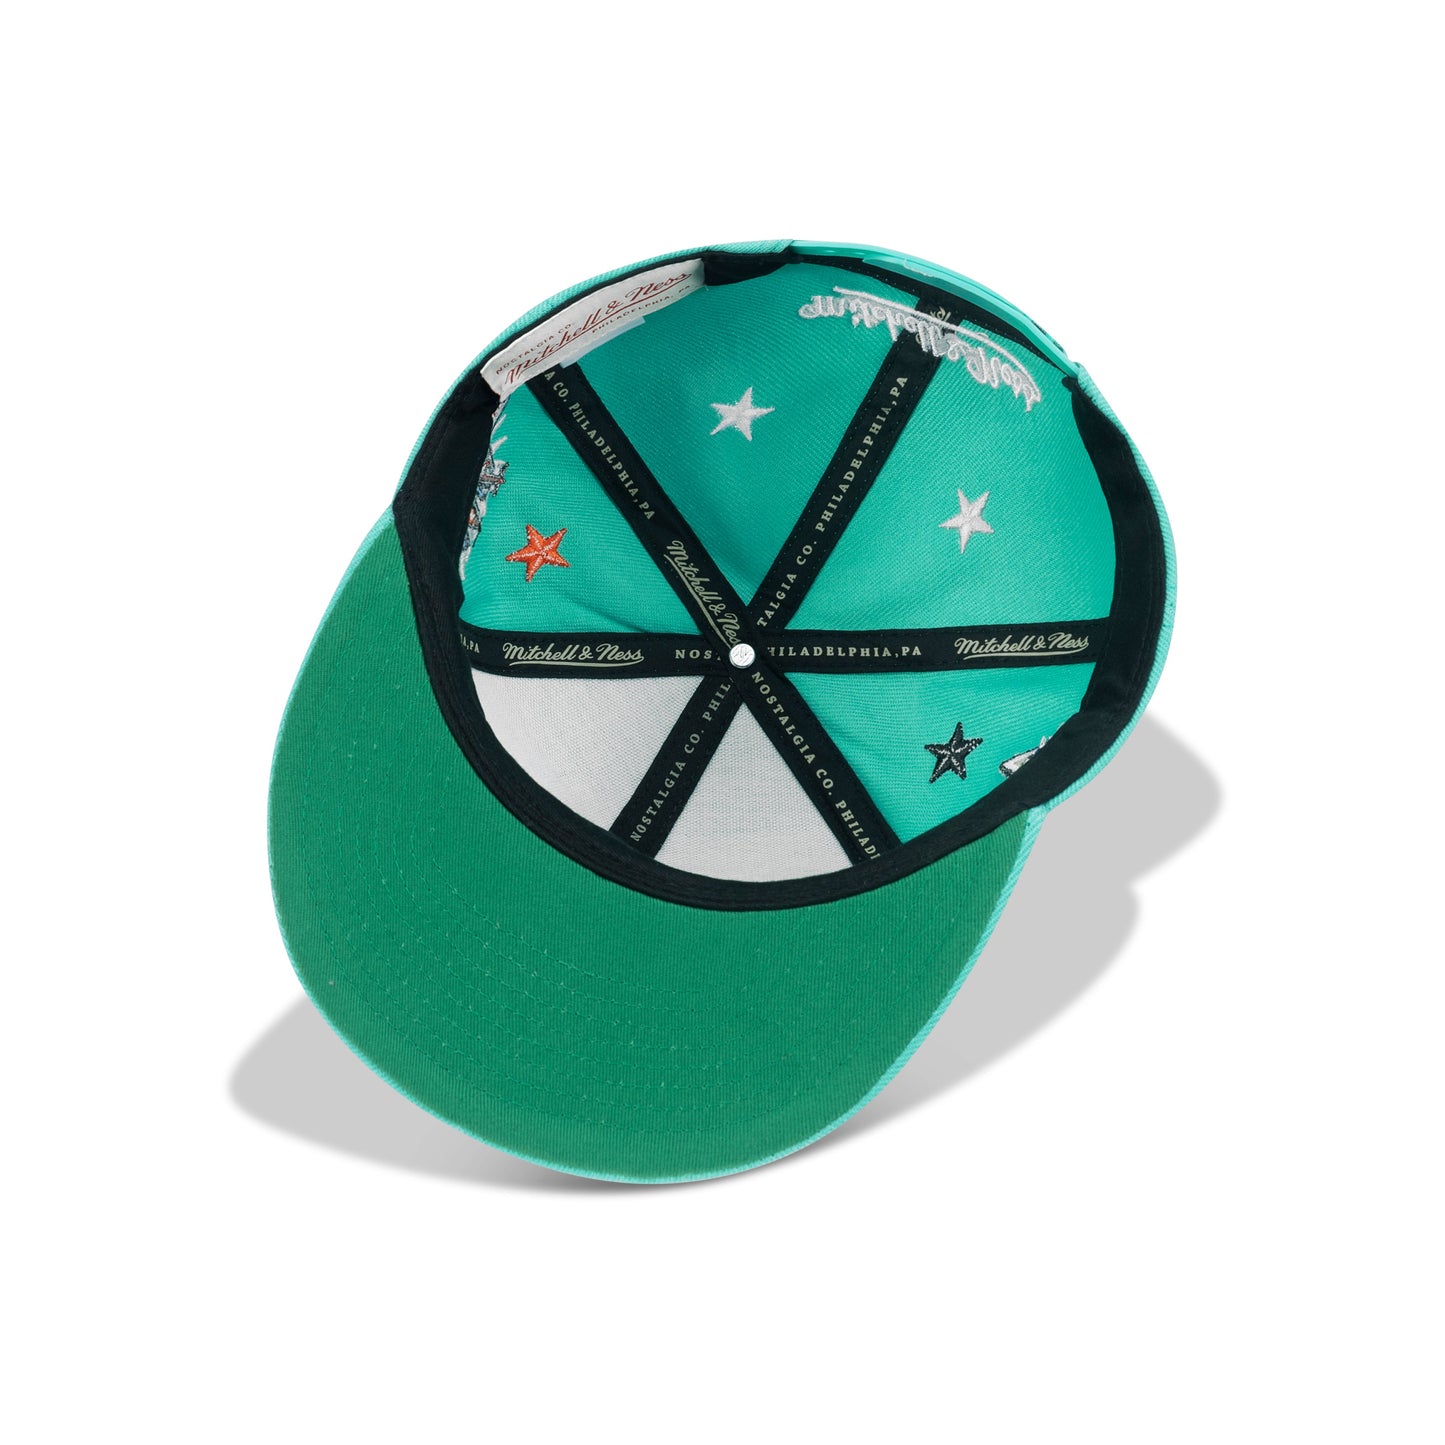 Mitchell & Ness Vancouver Grizzlies 1997 Top Star Snapback Green Bottom "Teal" (All Star Weekend 1997 Patch Embroidery)